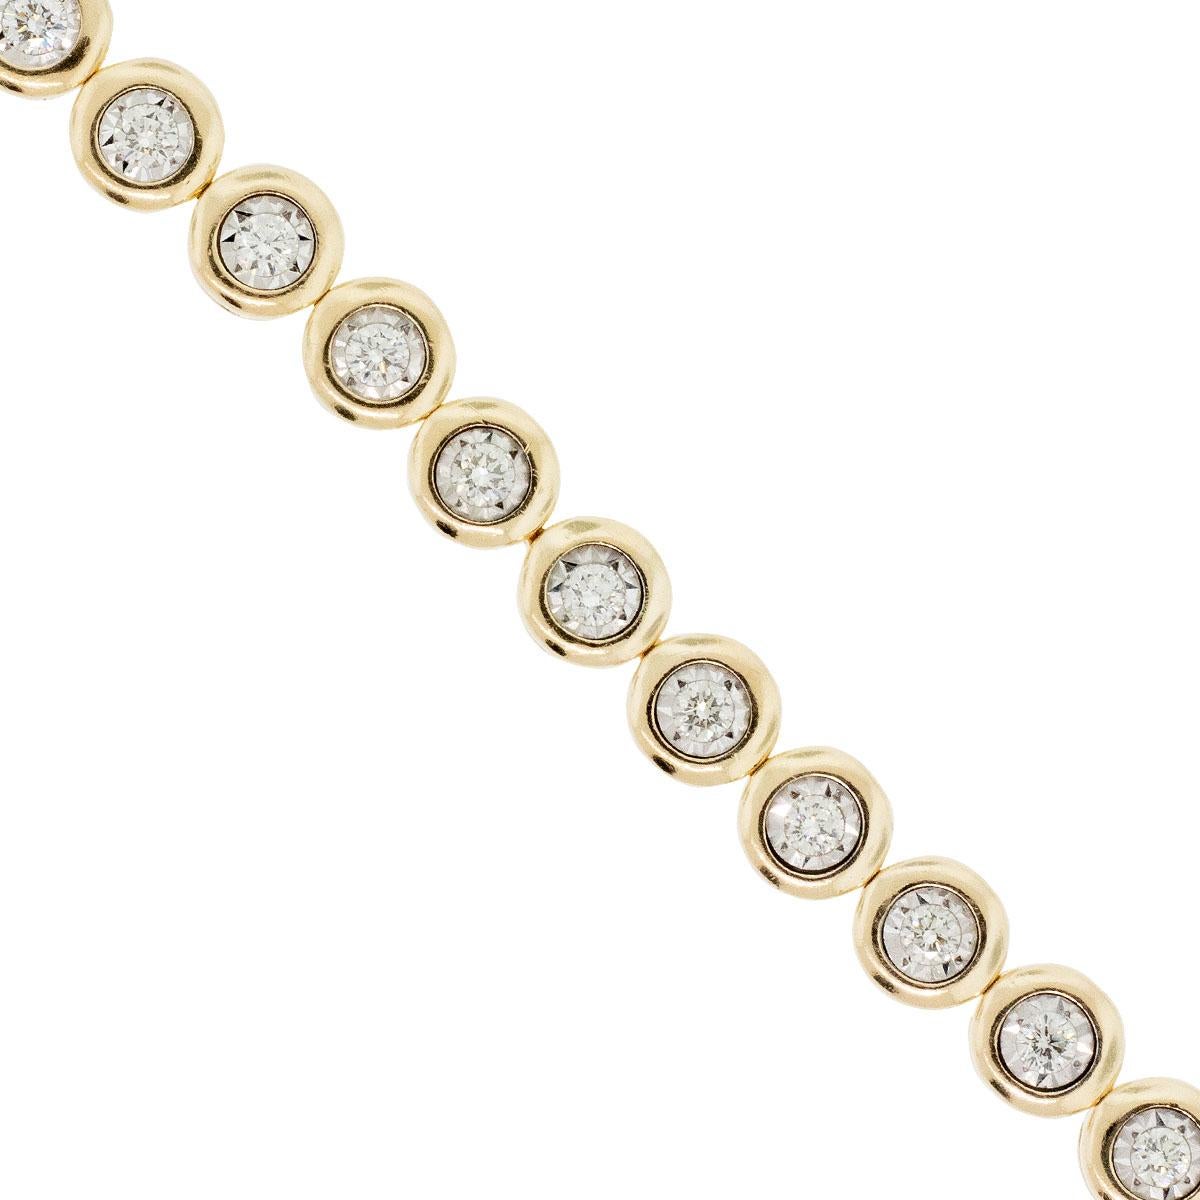 In the world of jewelry, certain pieces are iconic for their timeless elegance and universal appeal. The tennis bracelet is undoubtedly one of these cherished classics, and we're thrilled to introduce you to a breathtaking example: the 14k Yellow